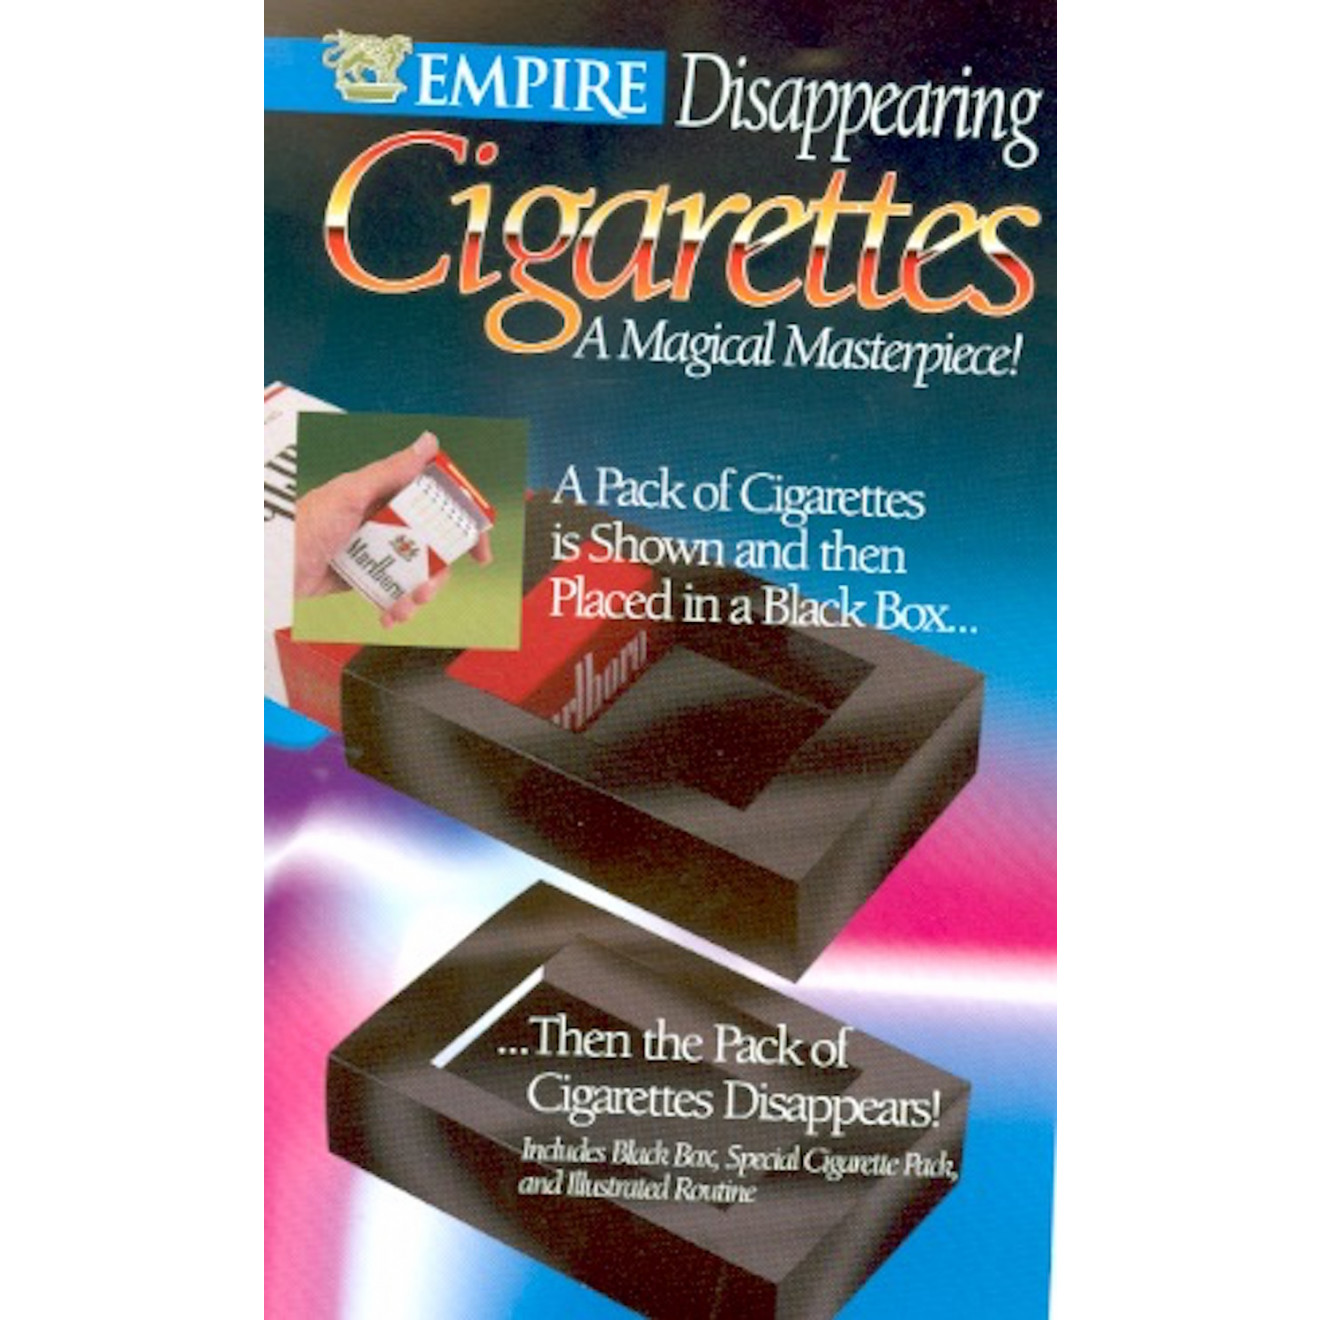 Disappearing Cigarettes